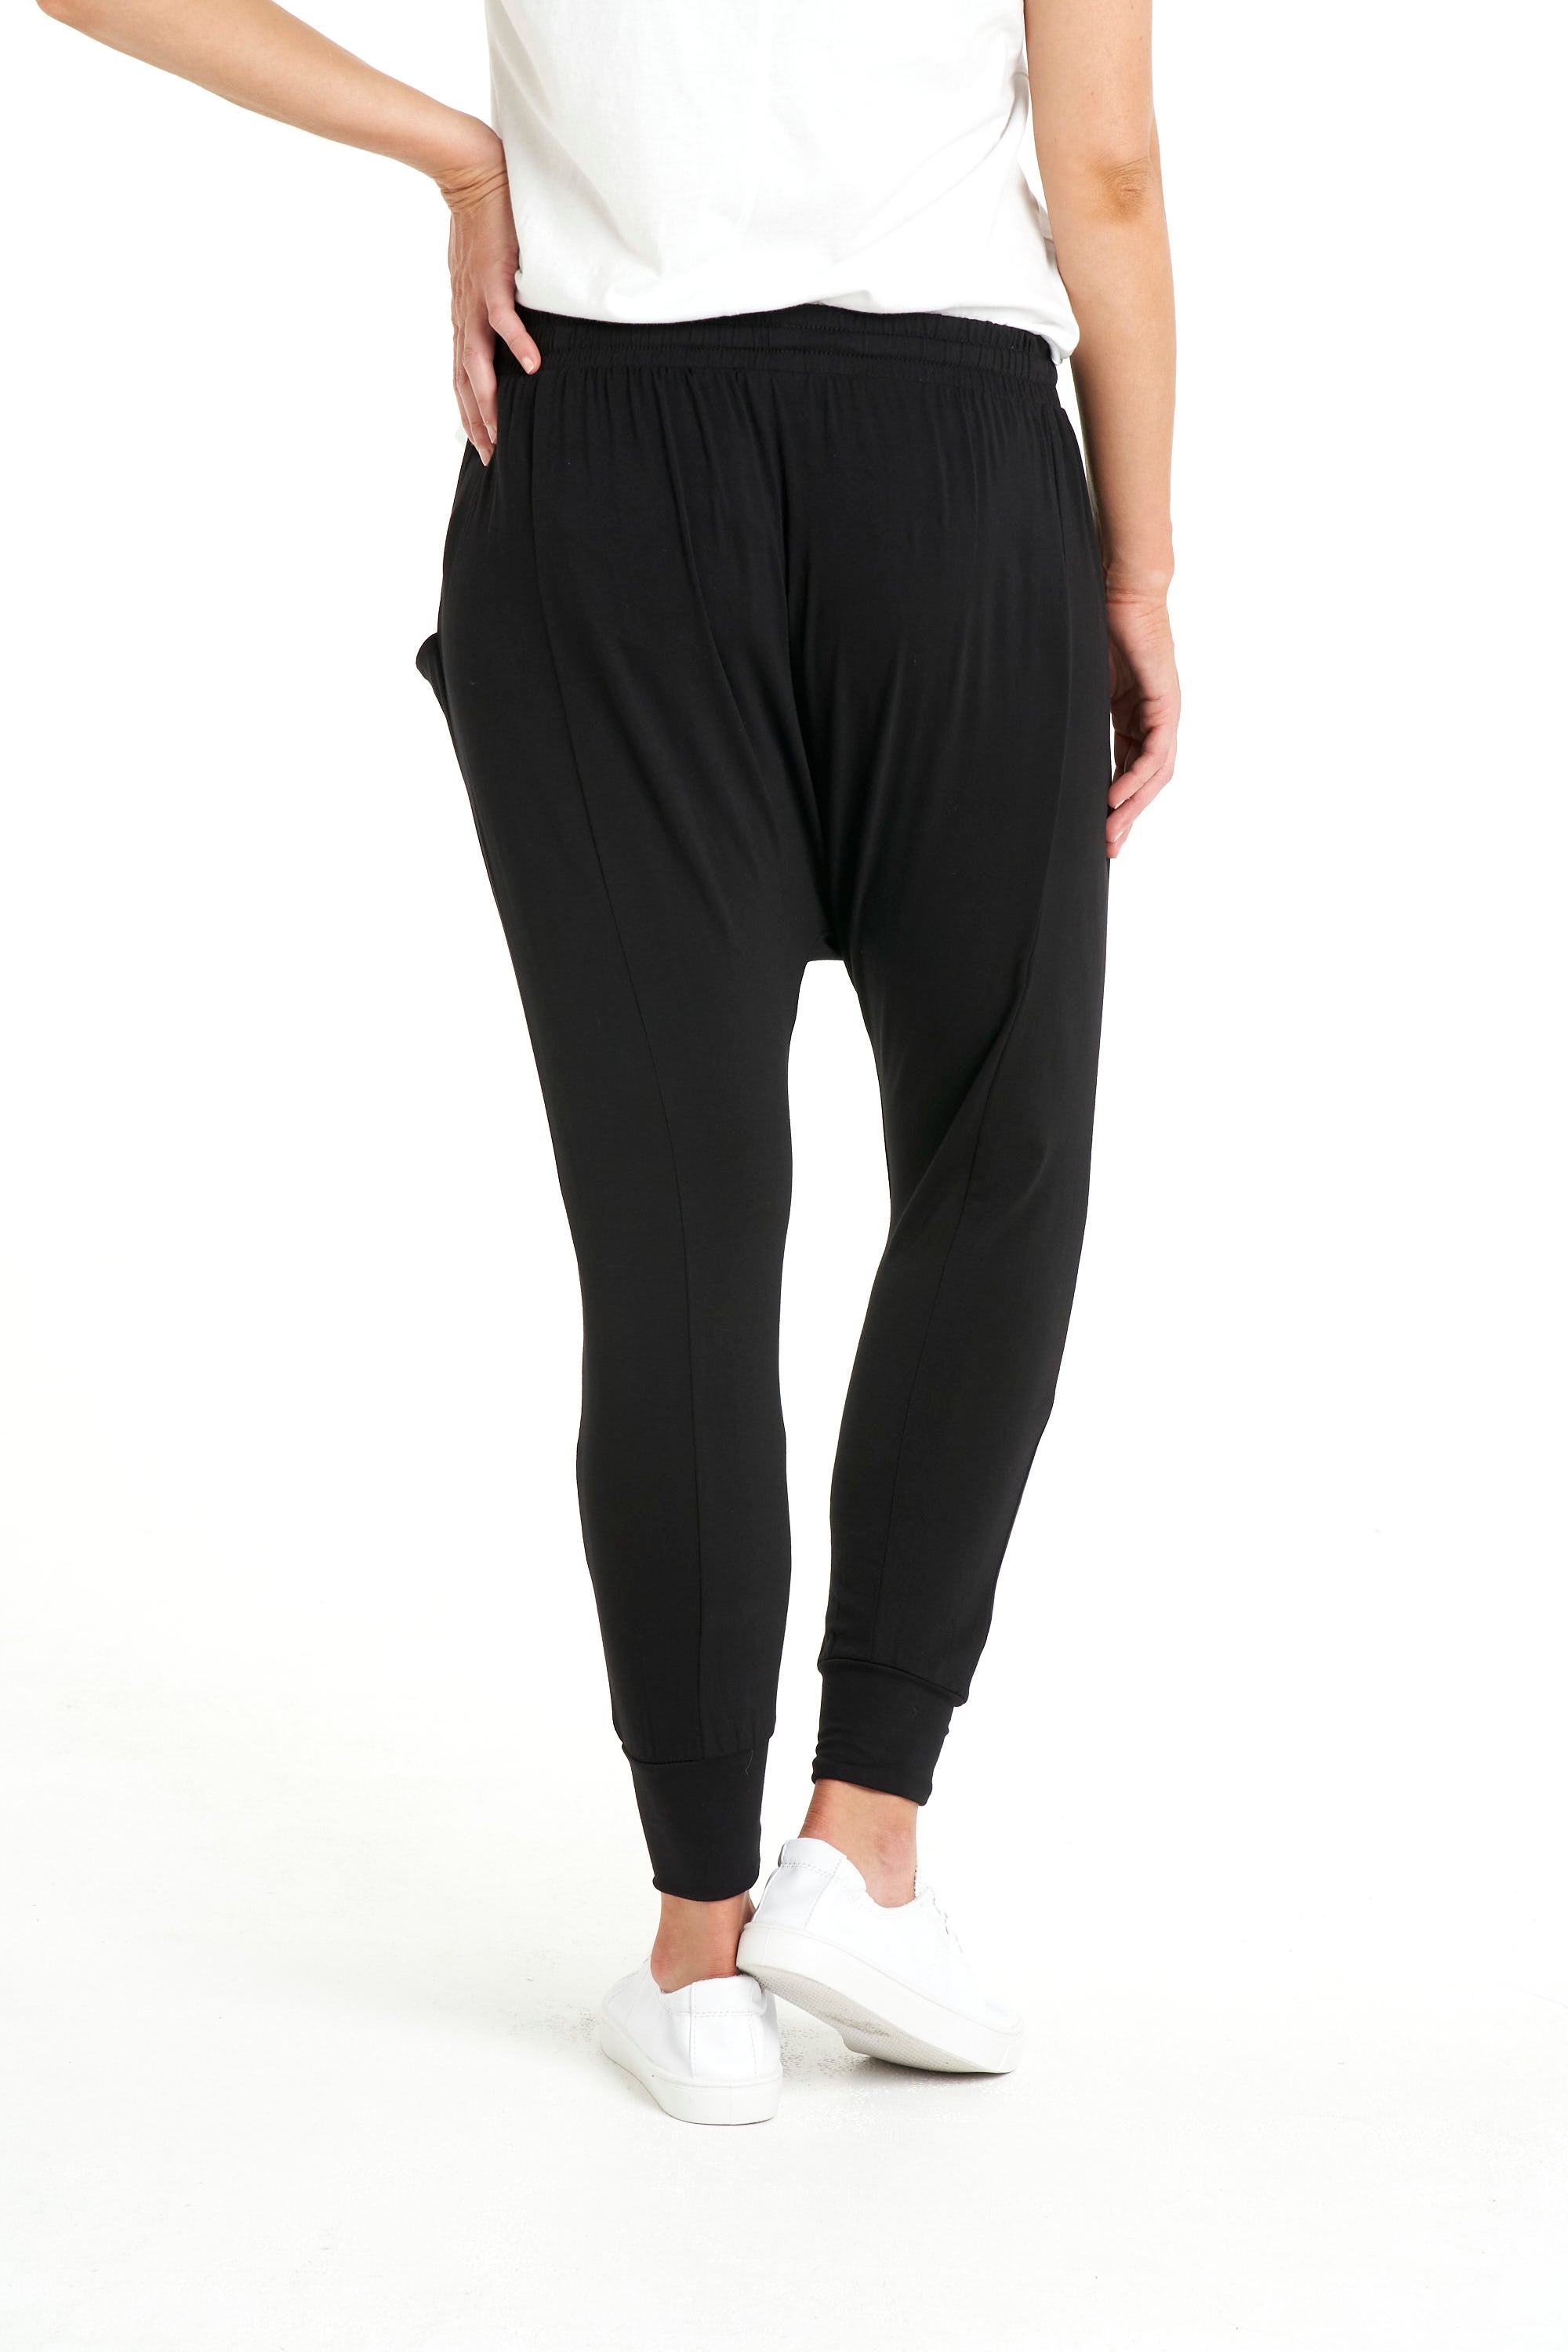 Barcelona Stretchy Relaxed Draped Jogger Pant - Black